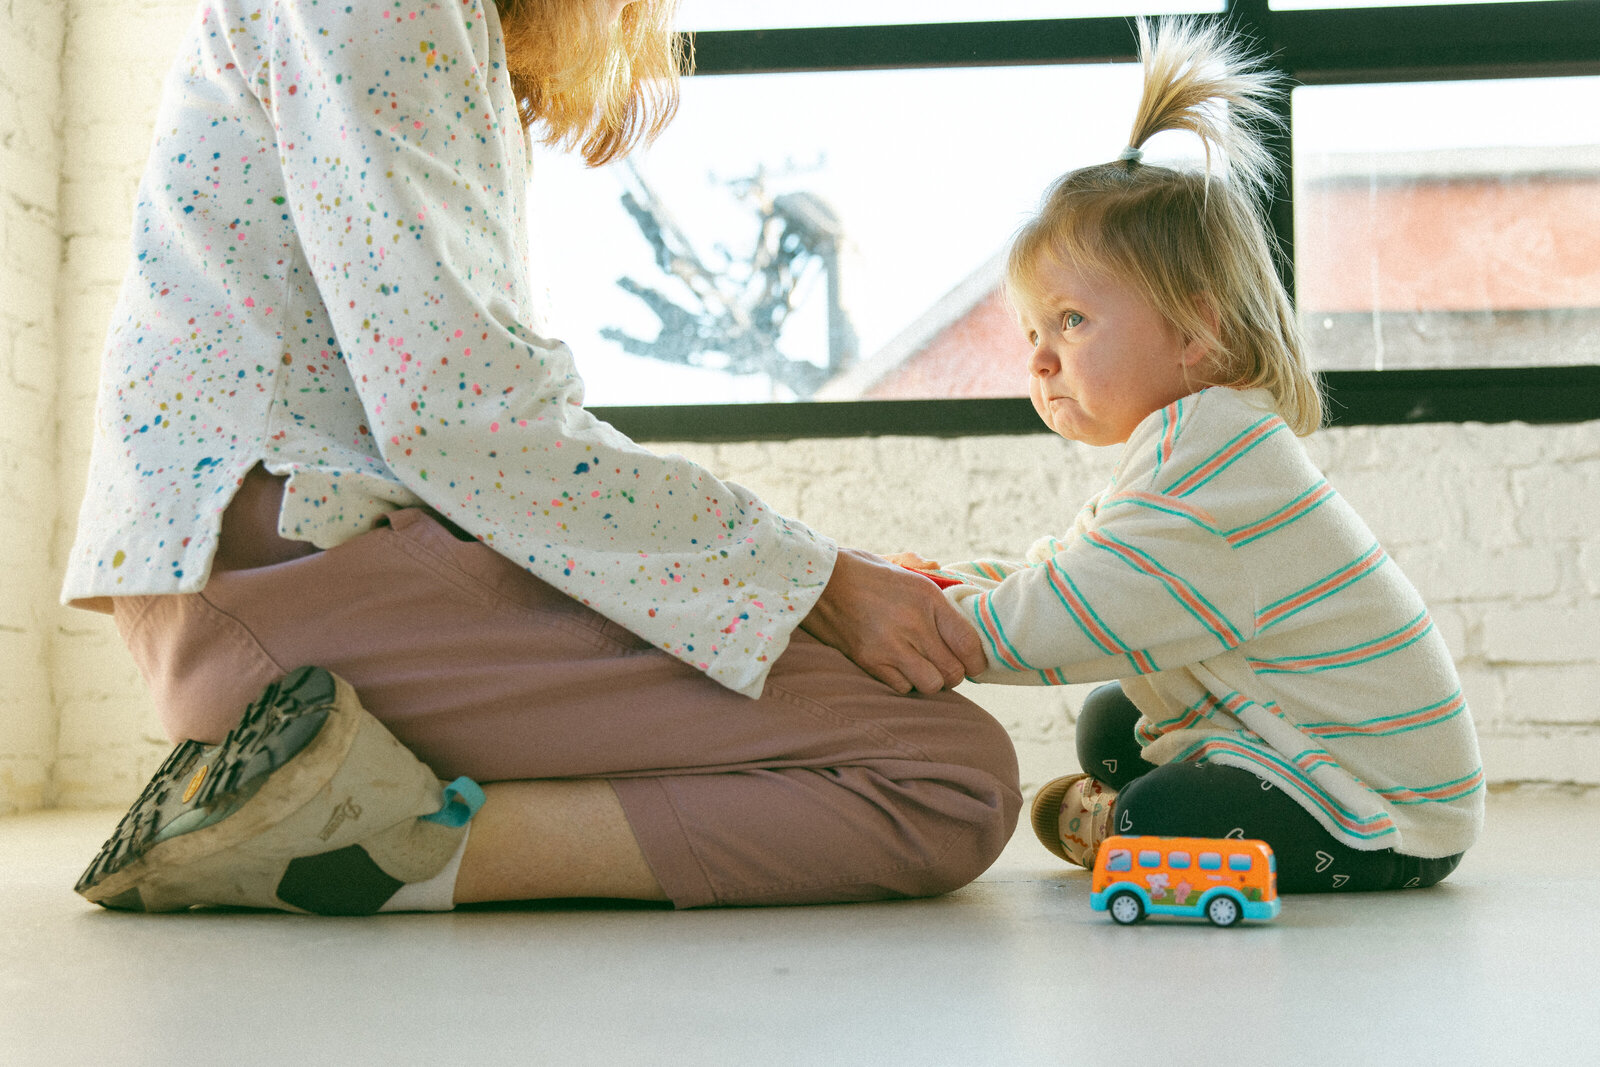 toddler girl with a sad face sitting on floor facing mom who is kneeling in front of her